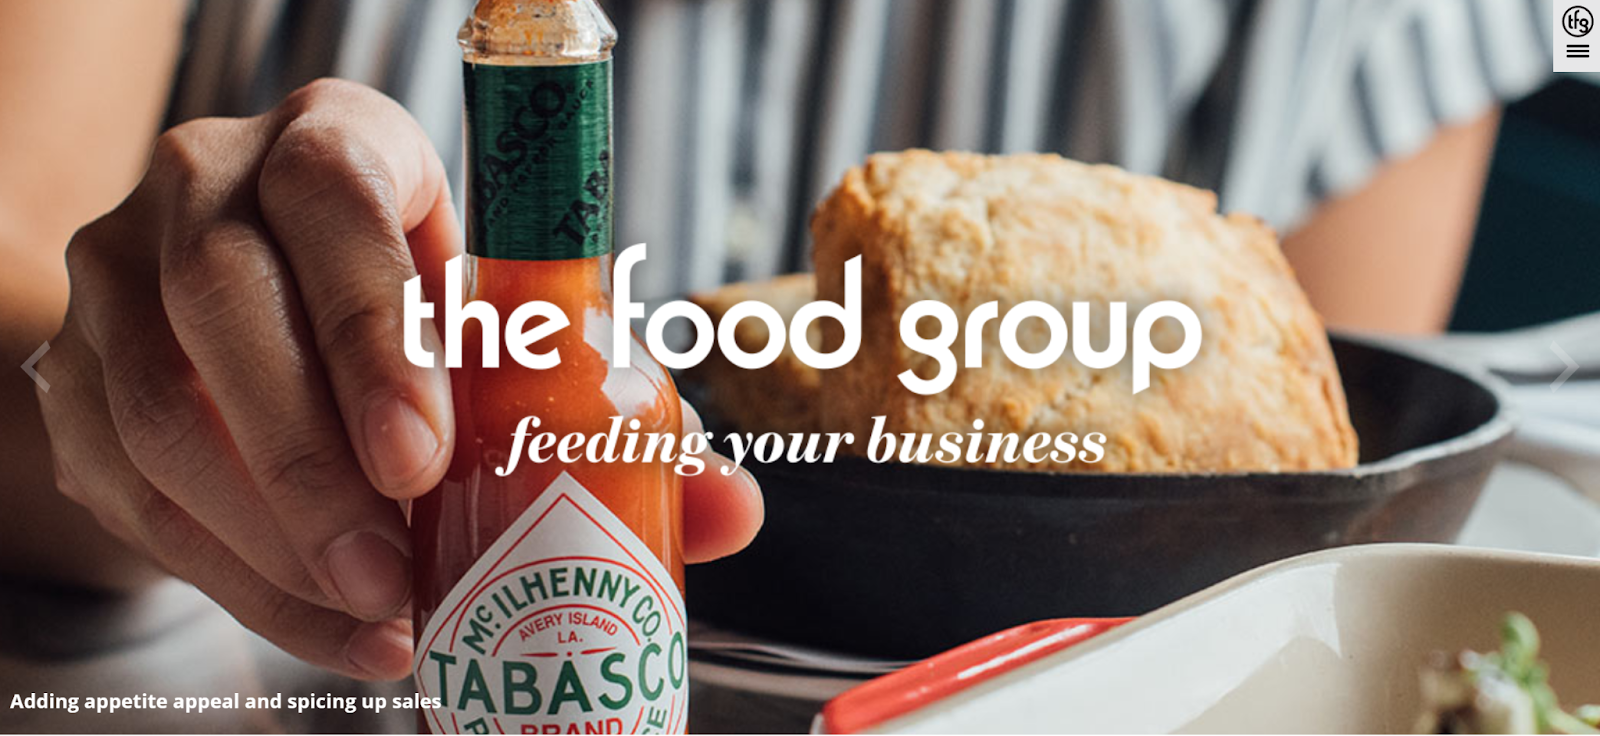 Food marketing agency - the food group